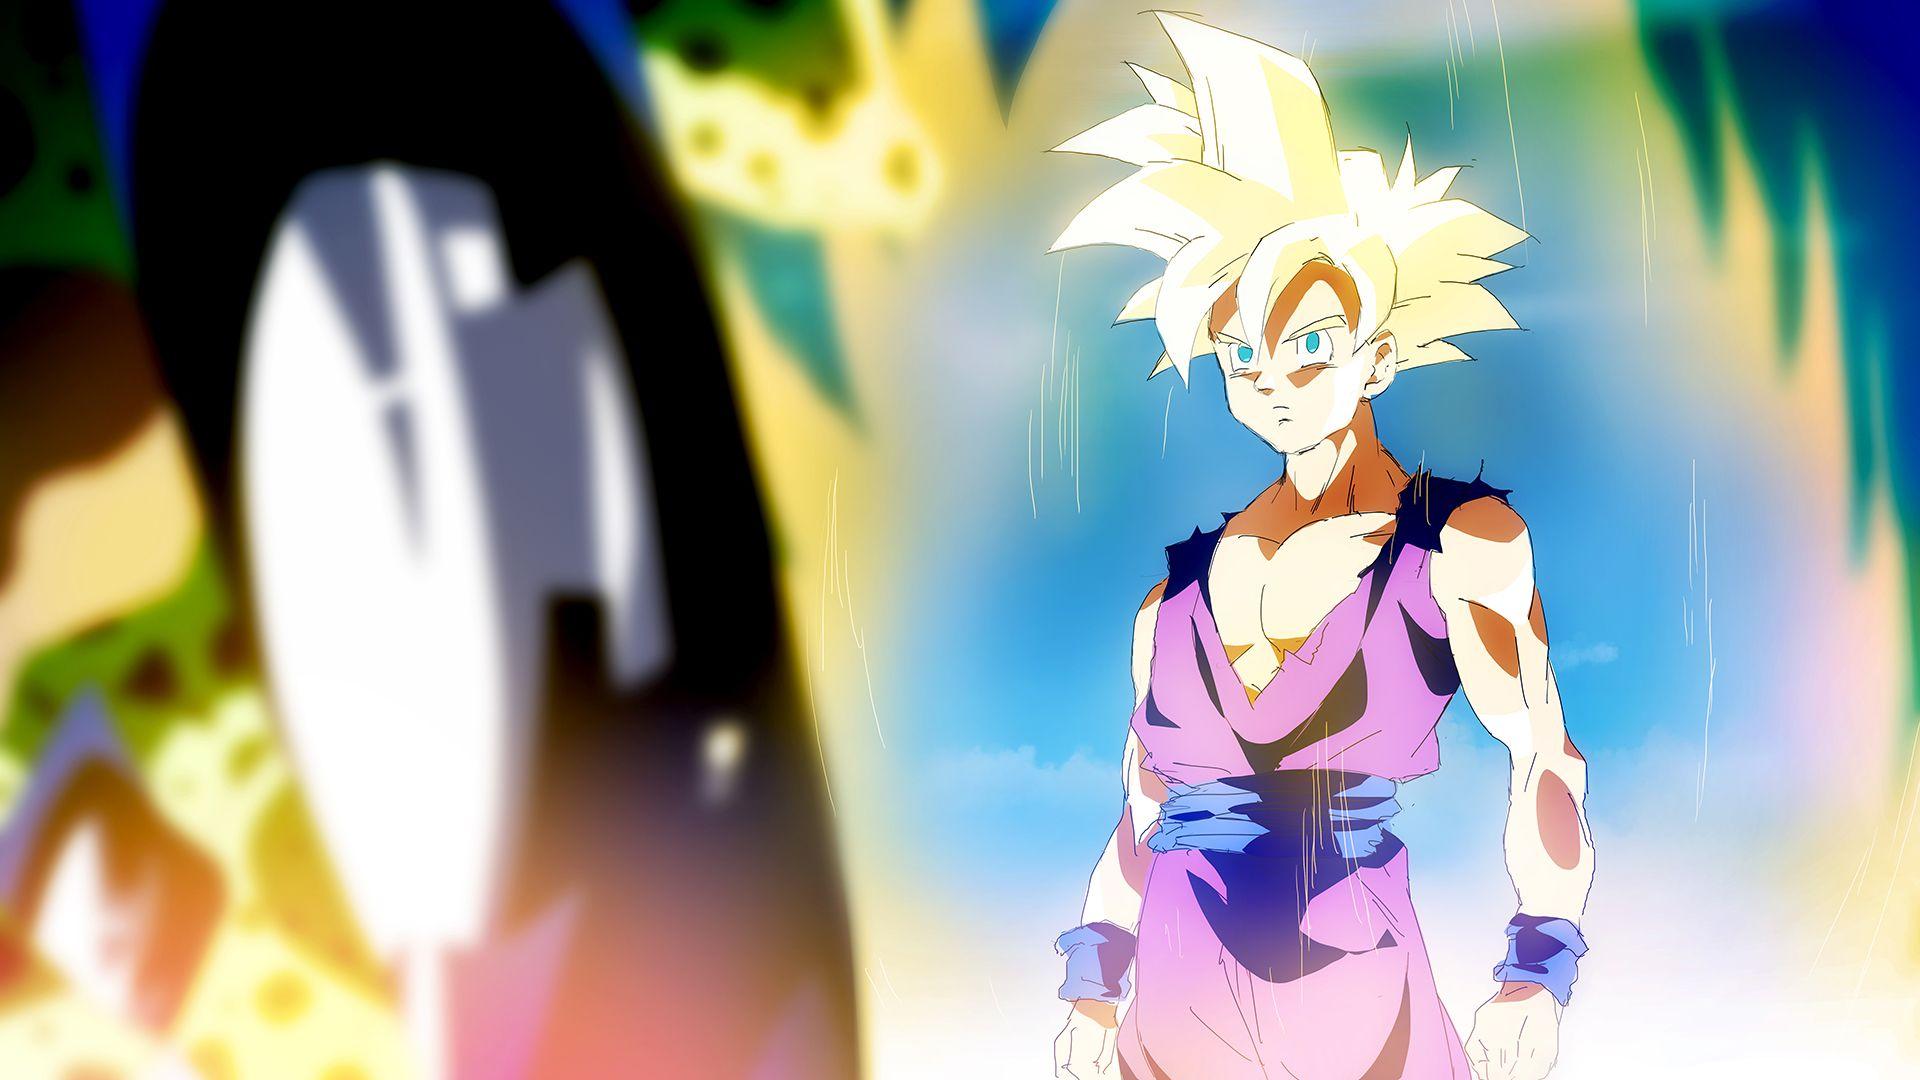 Gohan Vs Cell Full HD Wallpapers and Backgrounds Image.